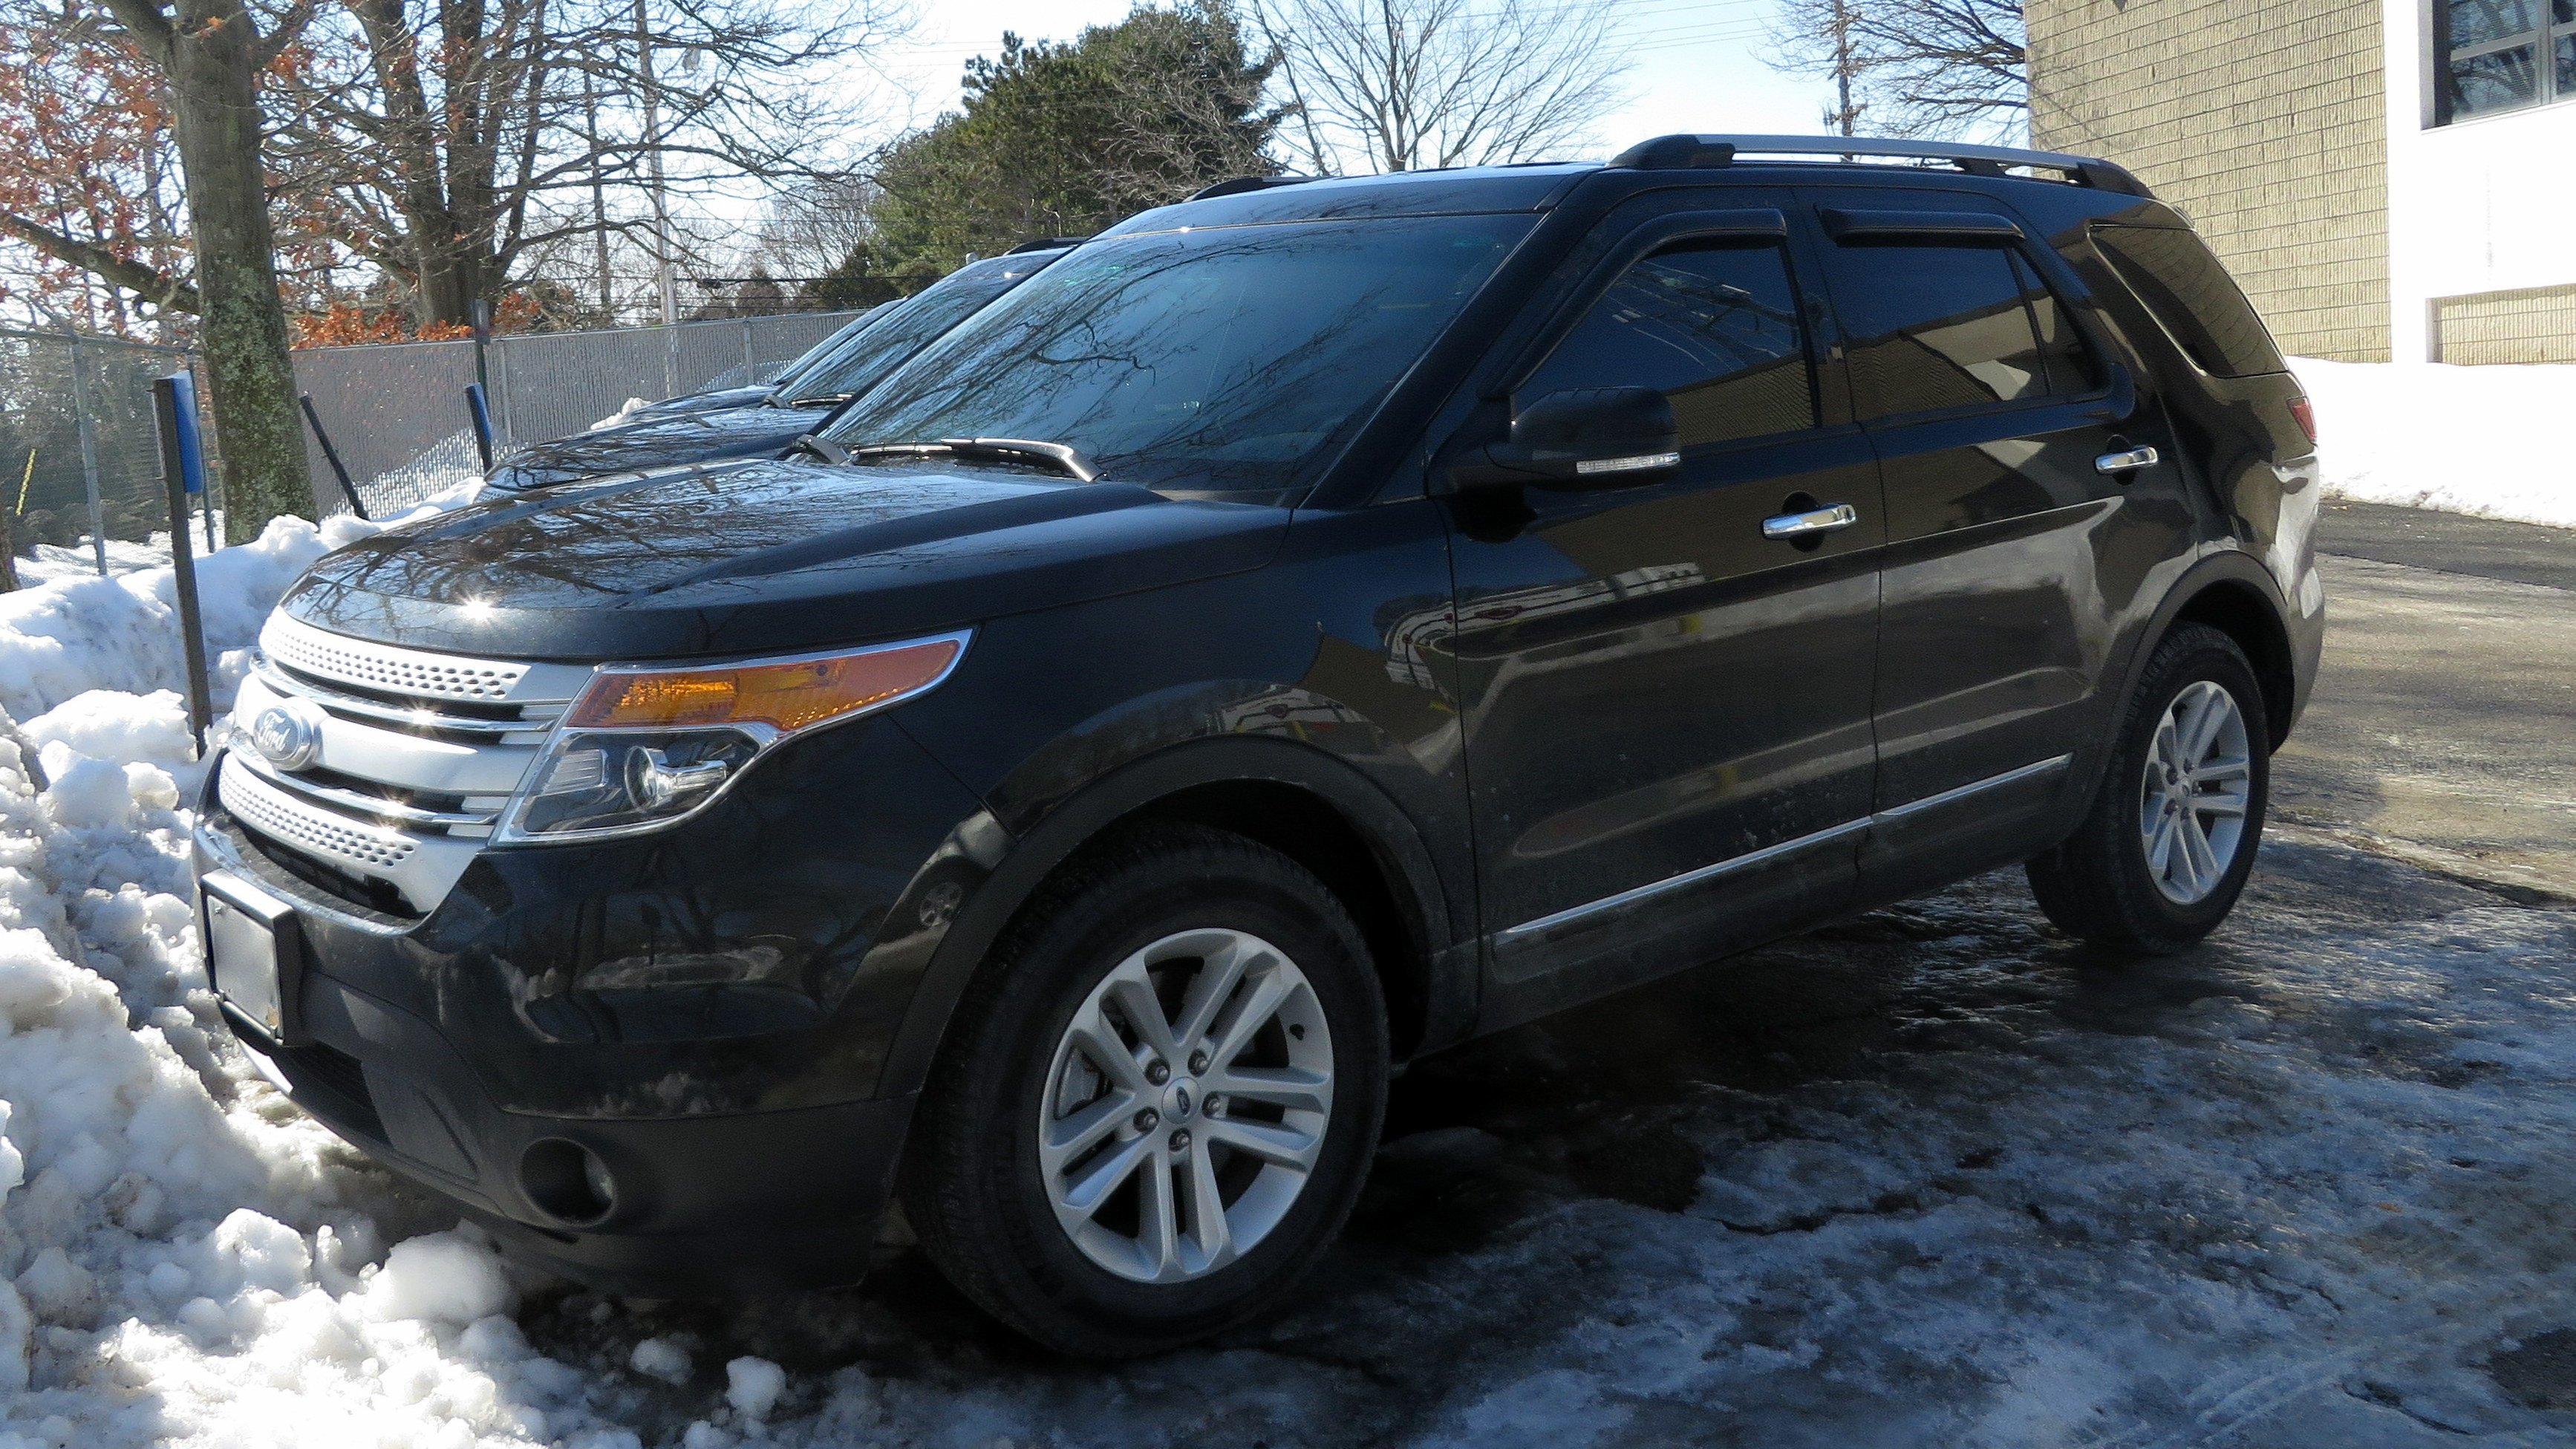 A photo  of East Providence Police
            Chief's Unit, a 2013 Ford Explorer             taken by Kieran Egan